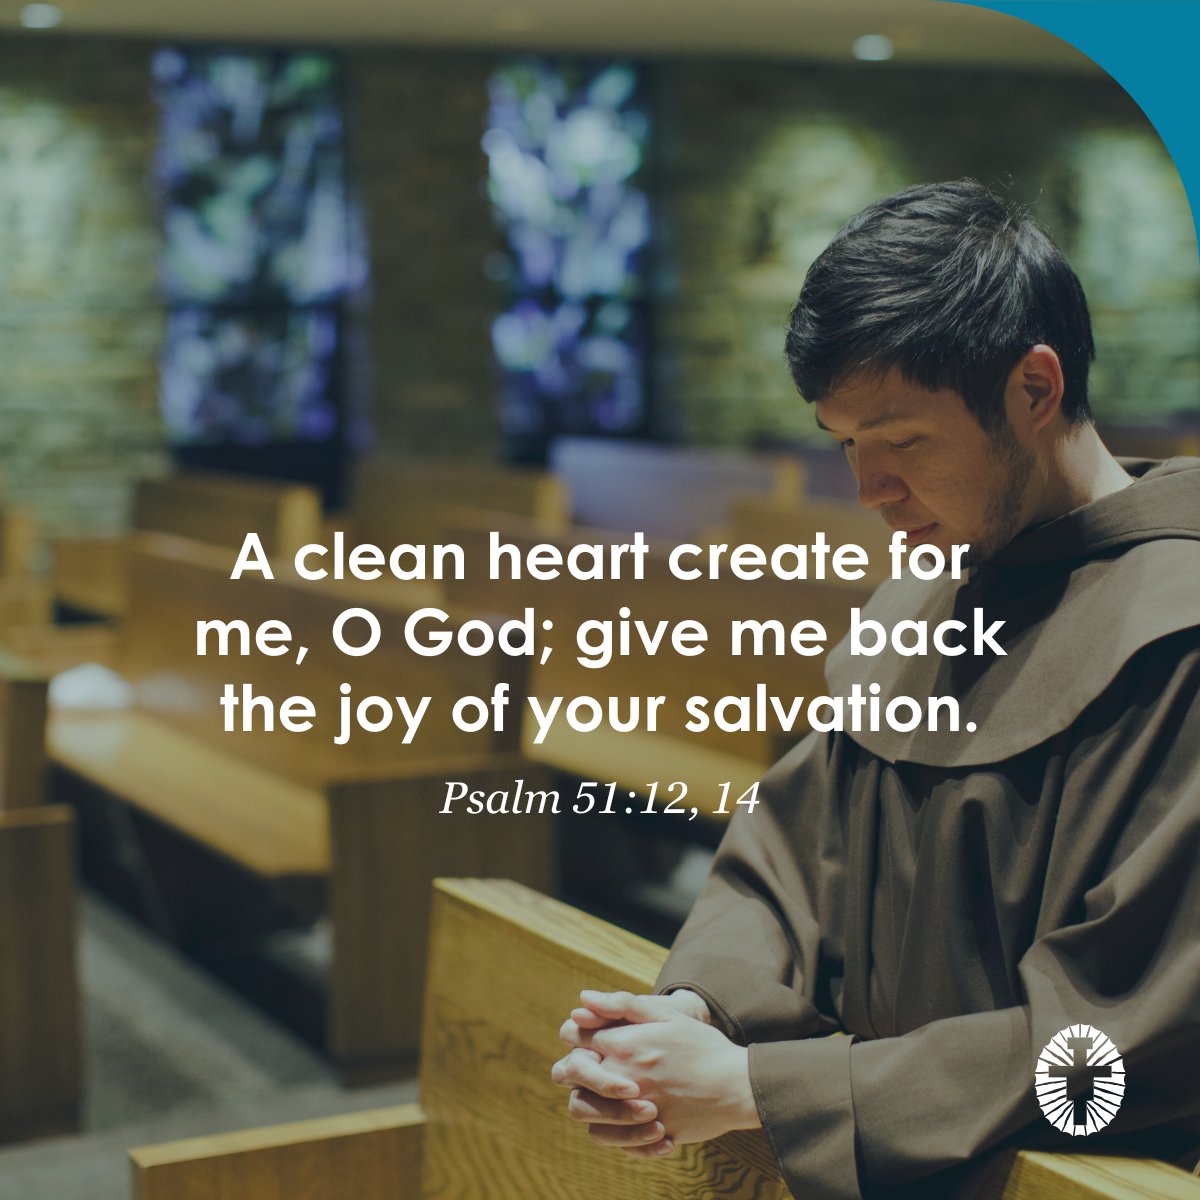 Our prayer for today is that we live this life with joy and that others may see that joy in us. May we spread the joy of God's salvation to others.

#lent #joy #peace #cleanheart #salvation